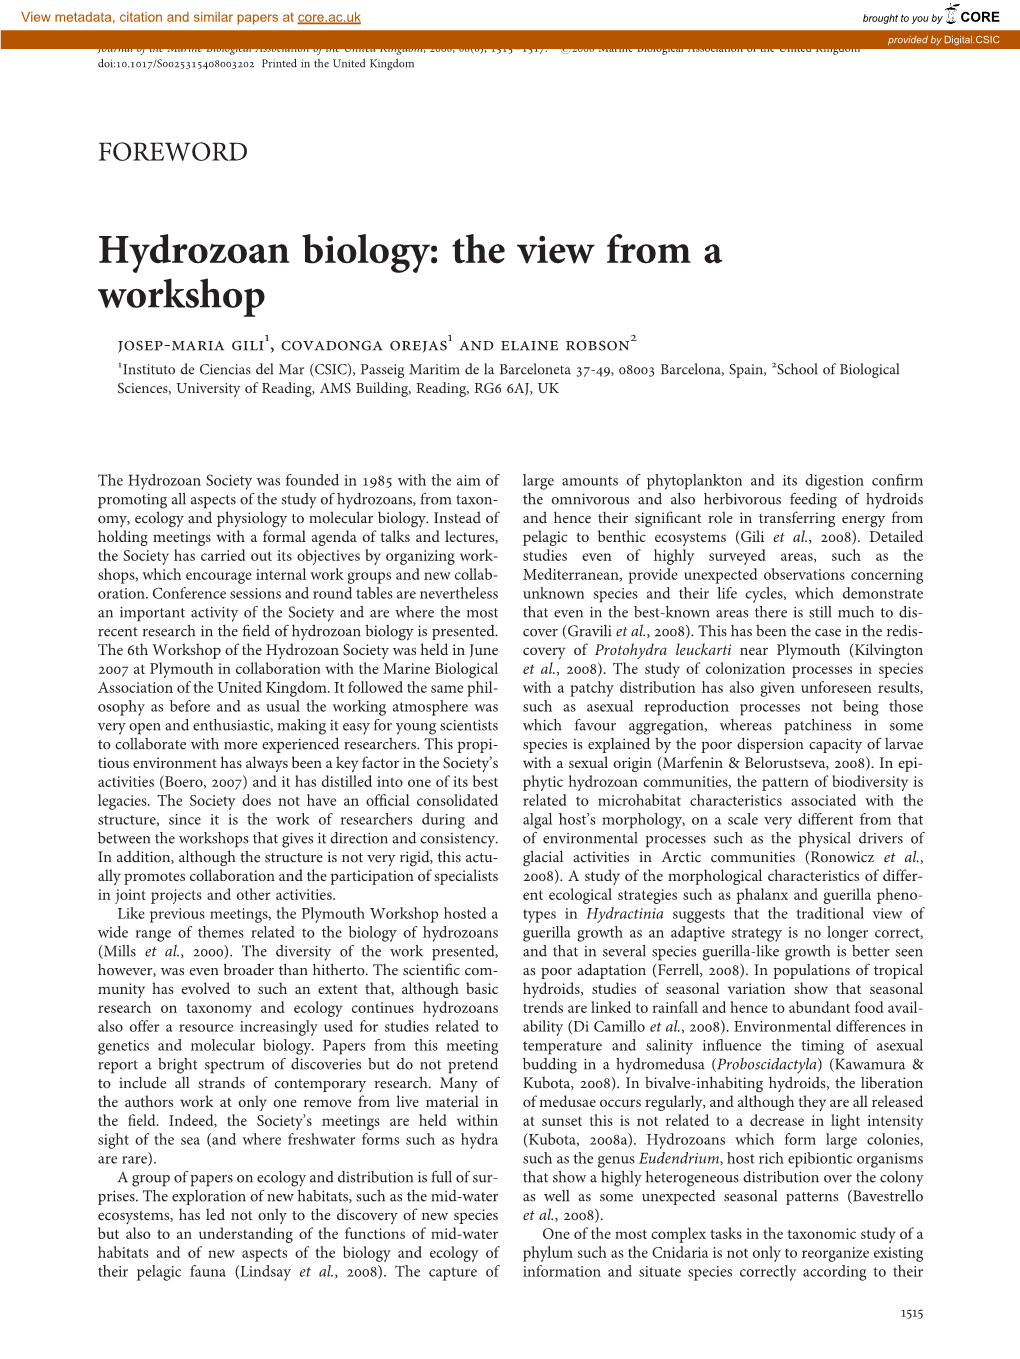 Hydrozoan Biology: the View from a Workshop